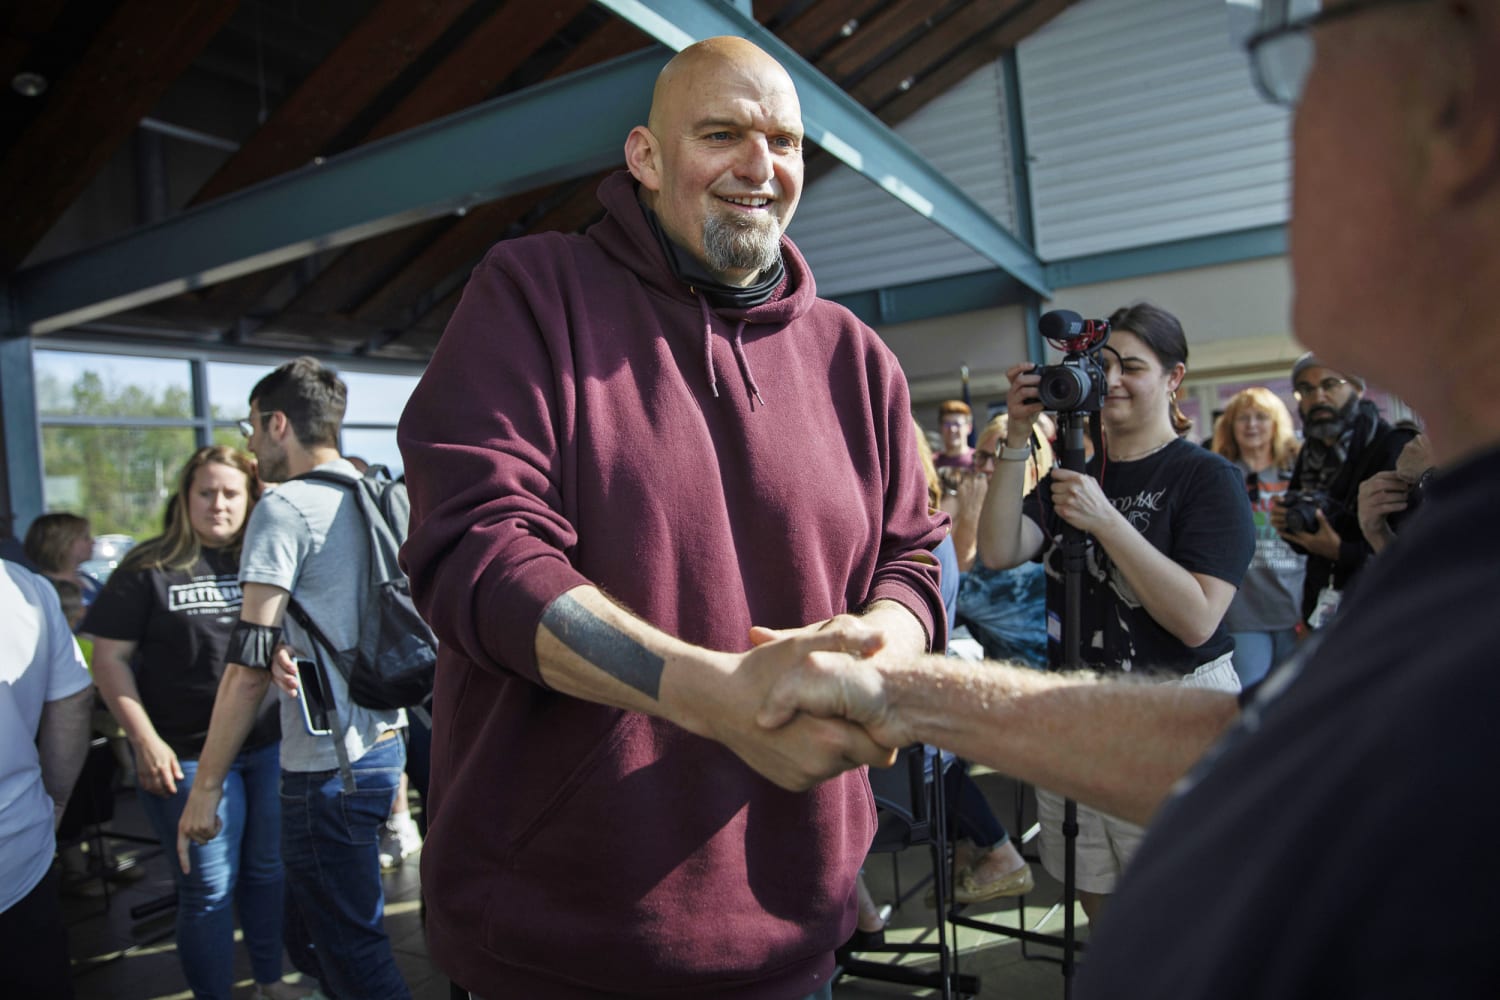 fetterman-s-health-return-to-campaign-trail-a-mystery-as-some-democrats-grow-very-nervous-about-pa-senate-race